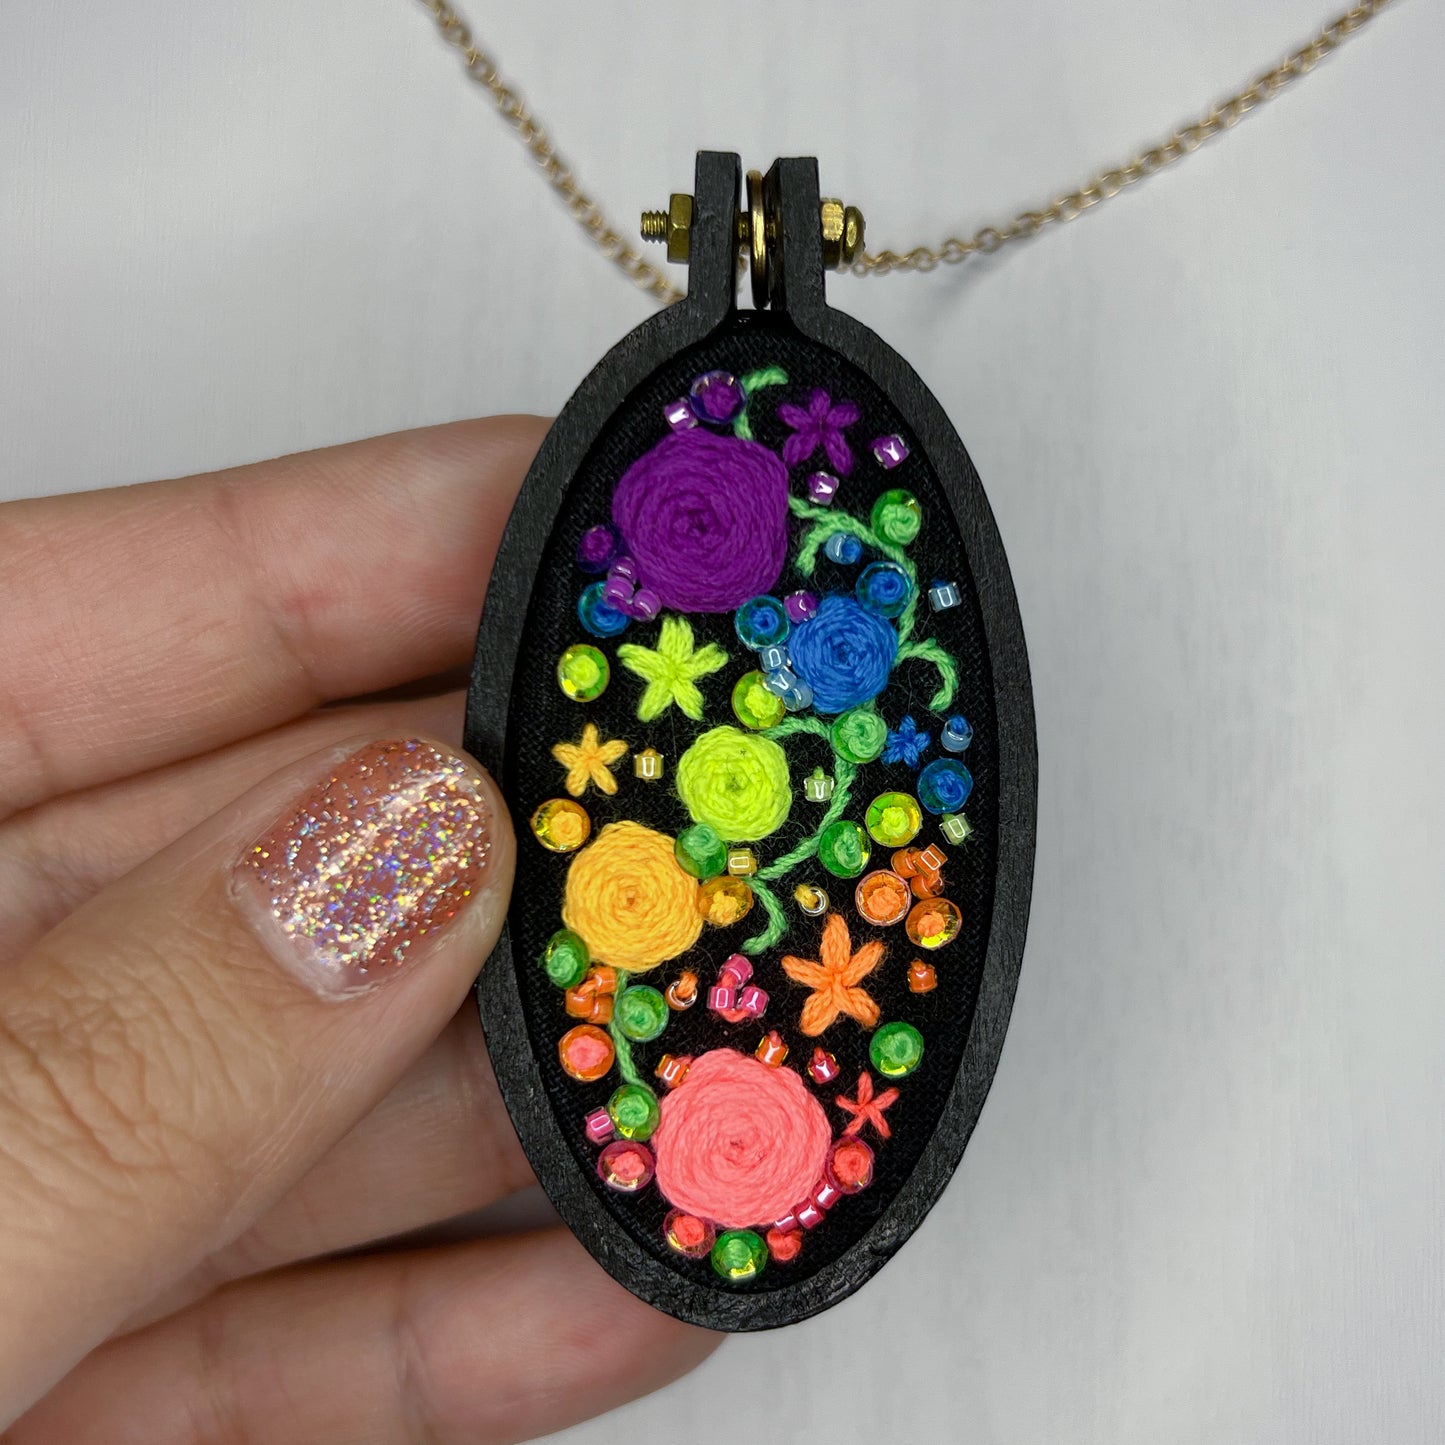 Embroidered Pendant Necklaces